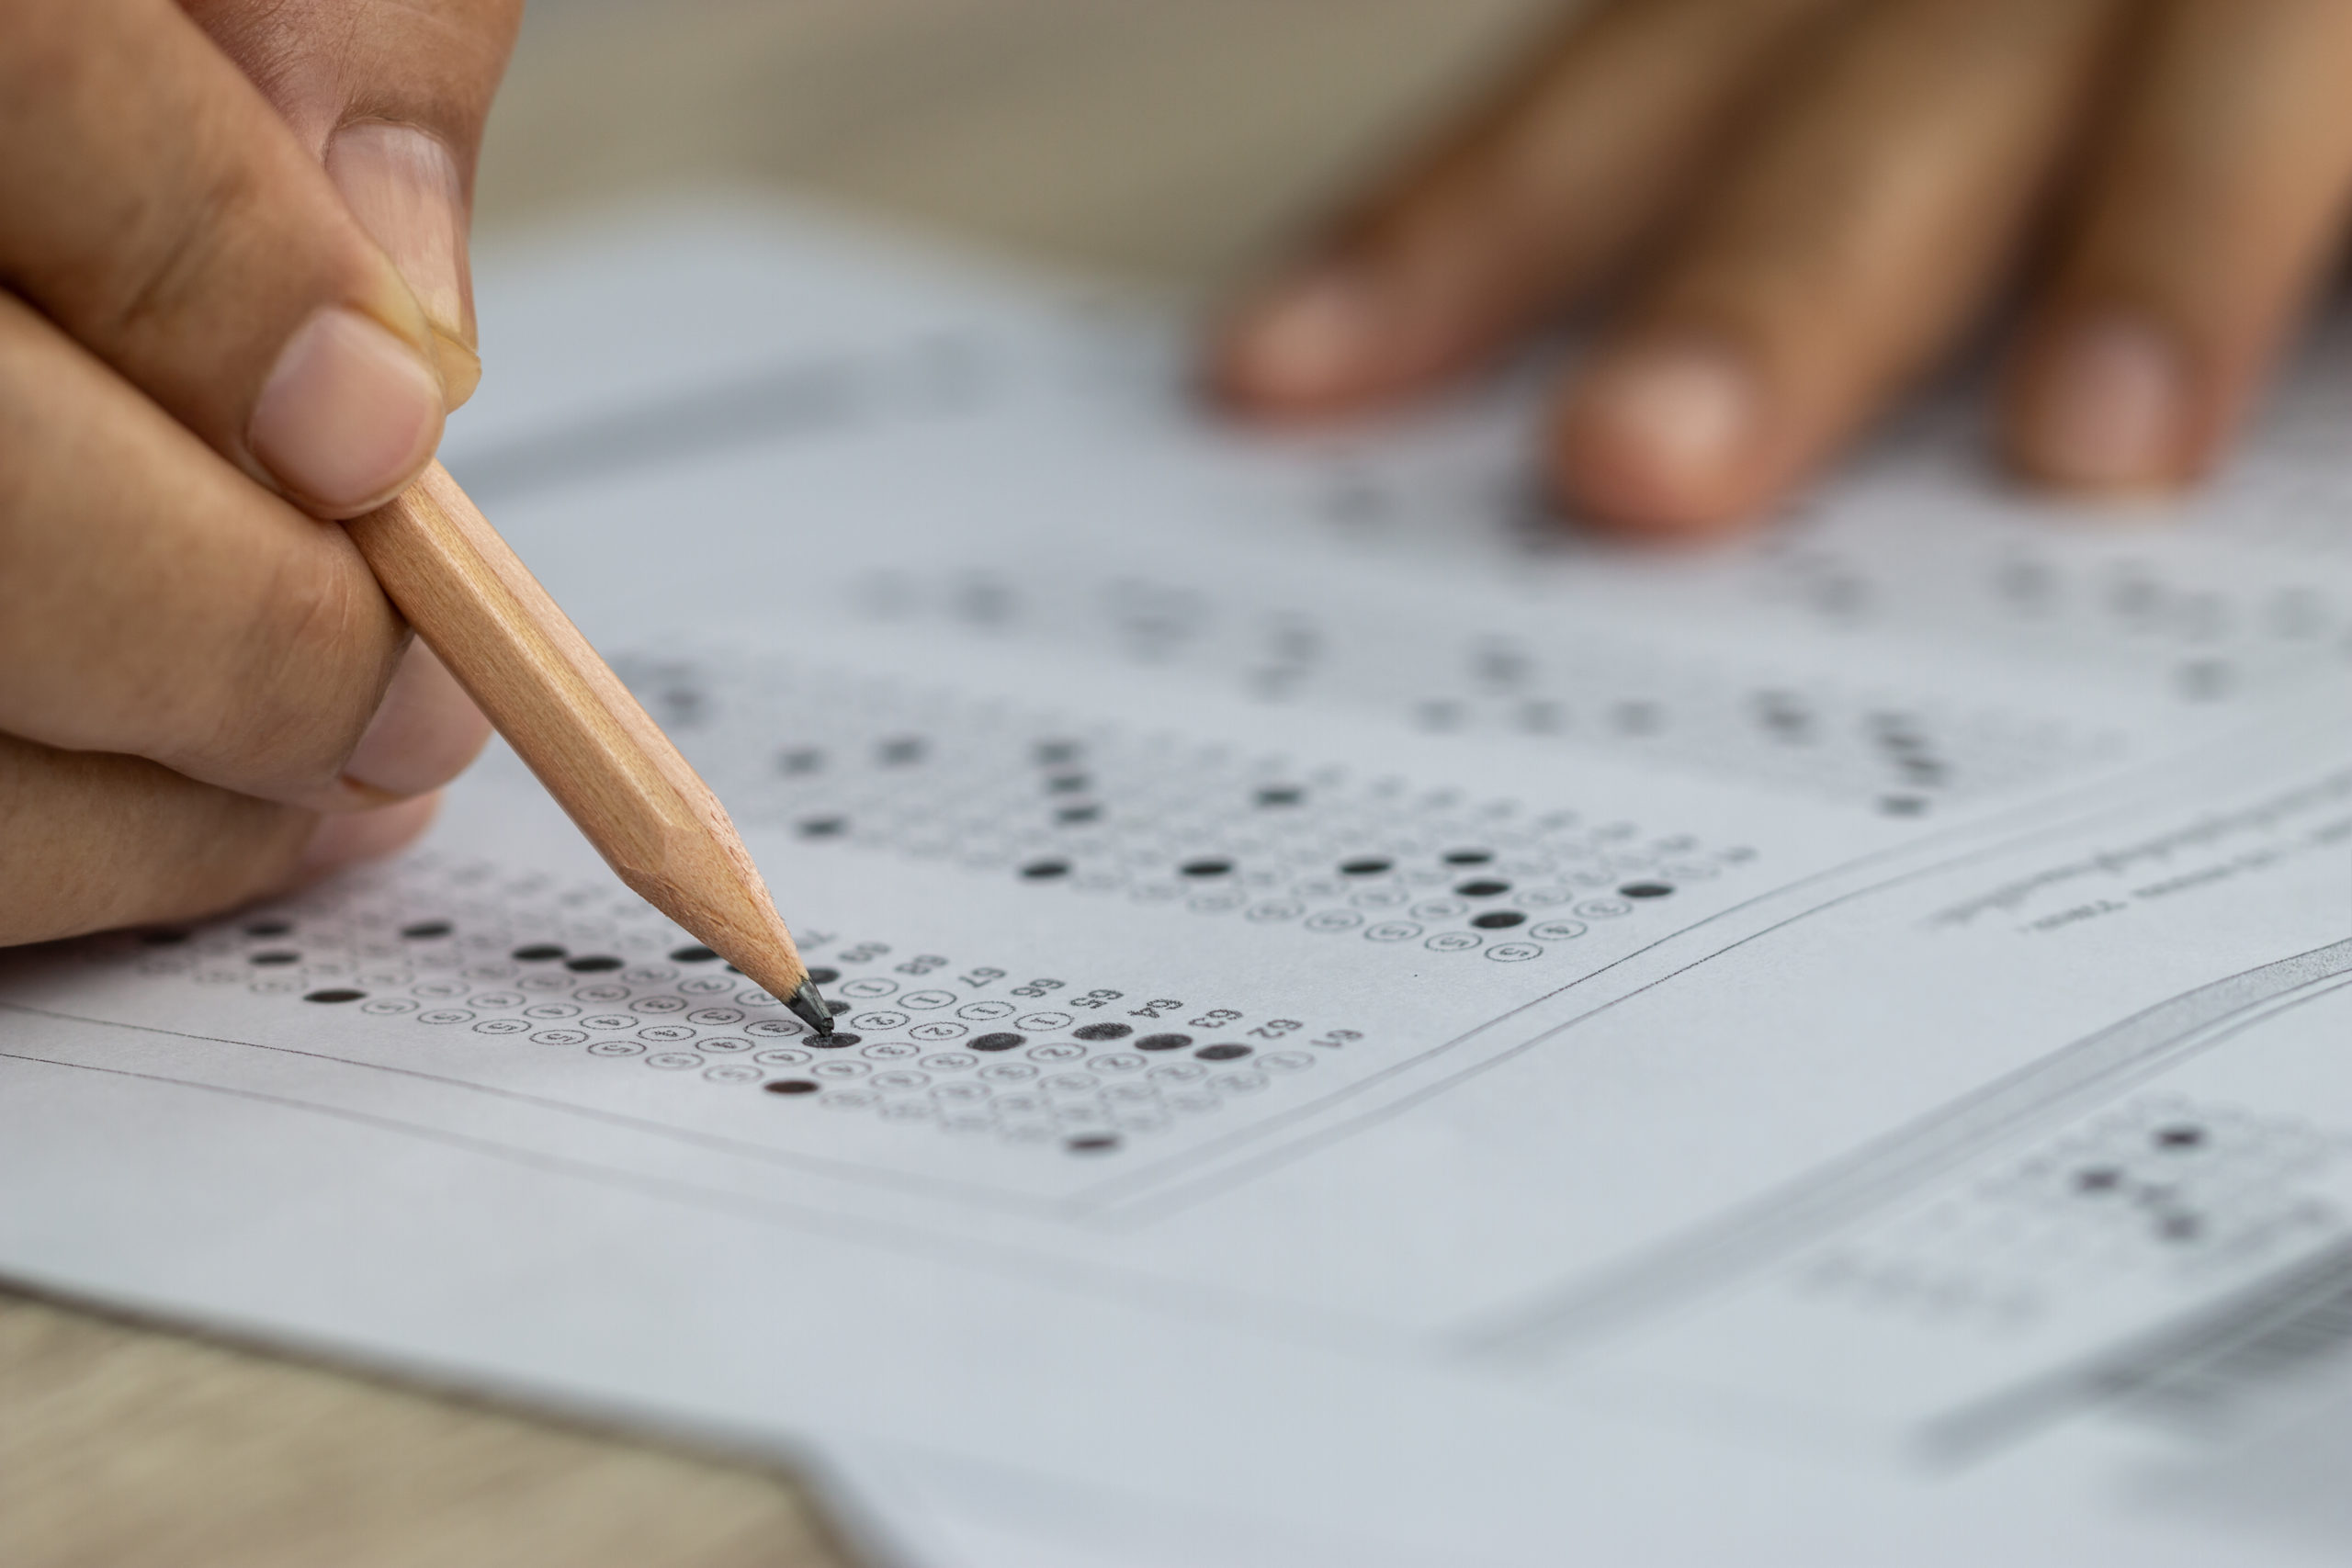 student's hands holding pencil and bubbling in answers on paper sat college test